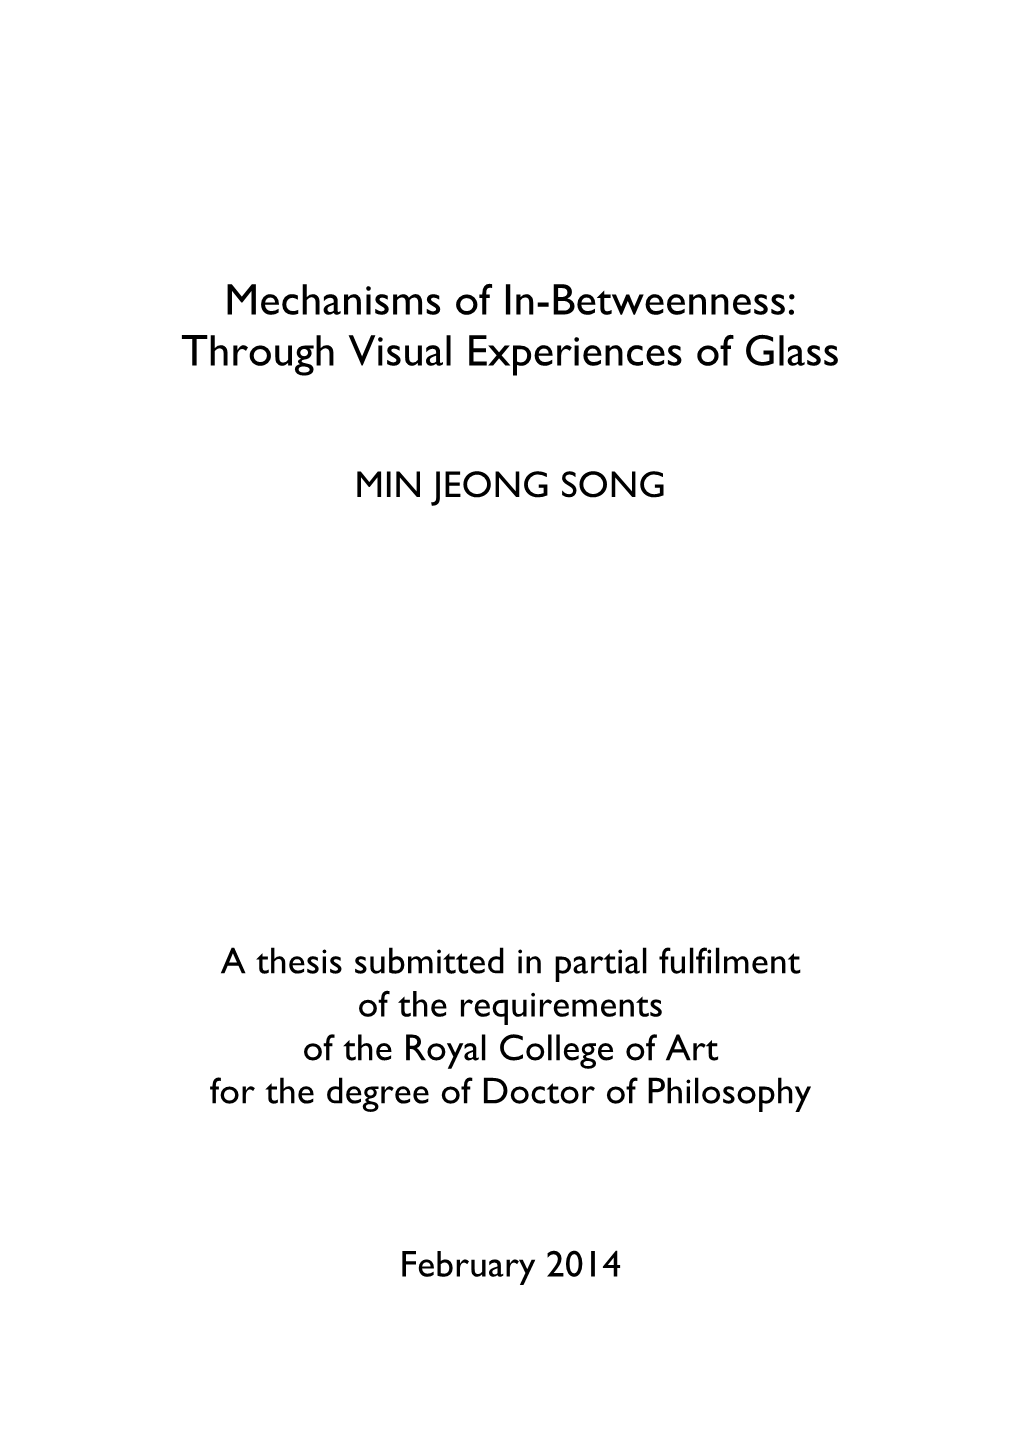 Mechanisms of In-Betweenness: Through Visual Experiences of Glass